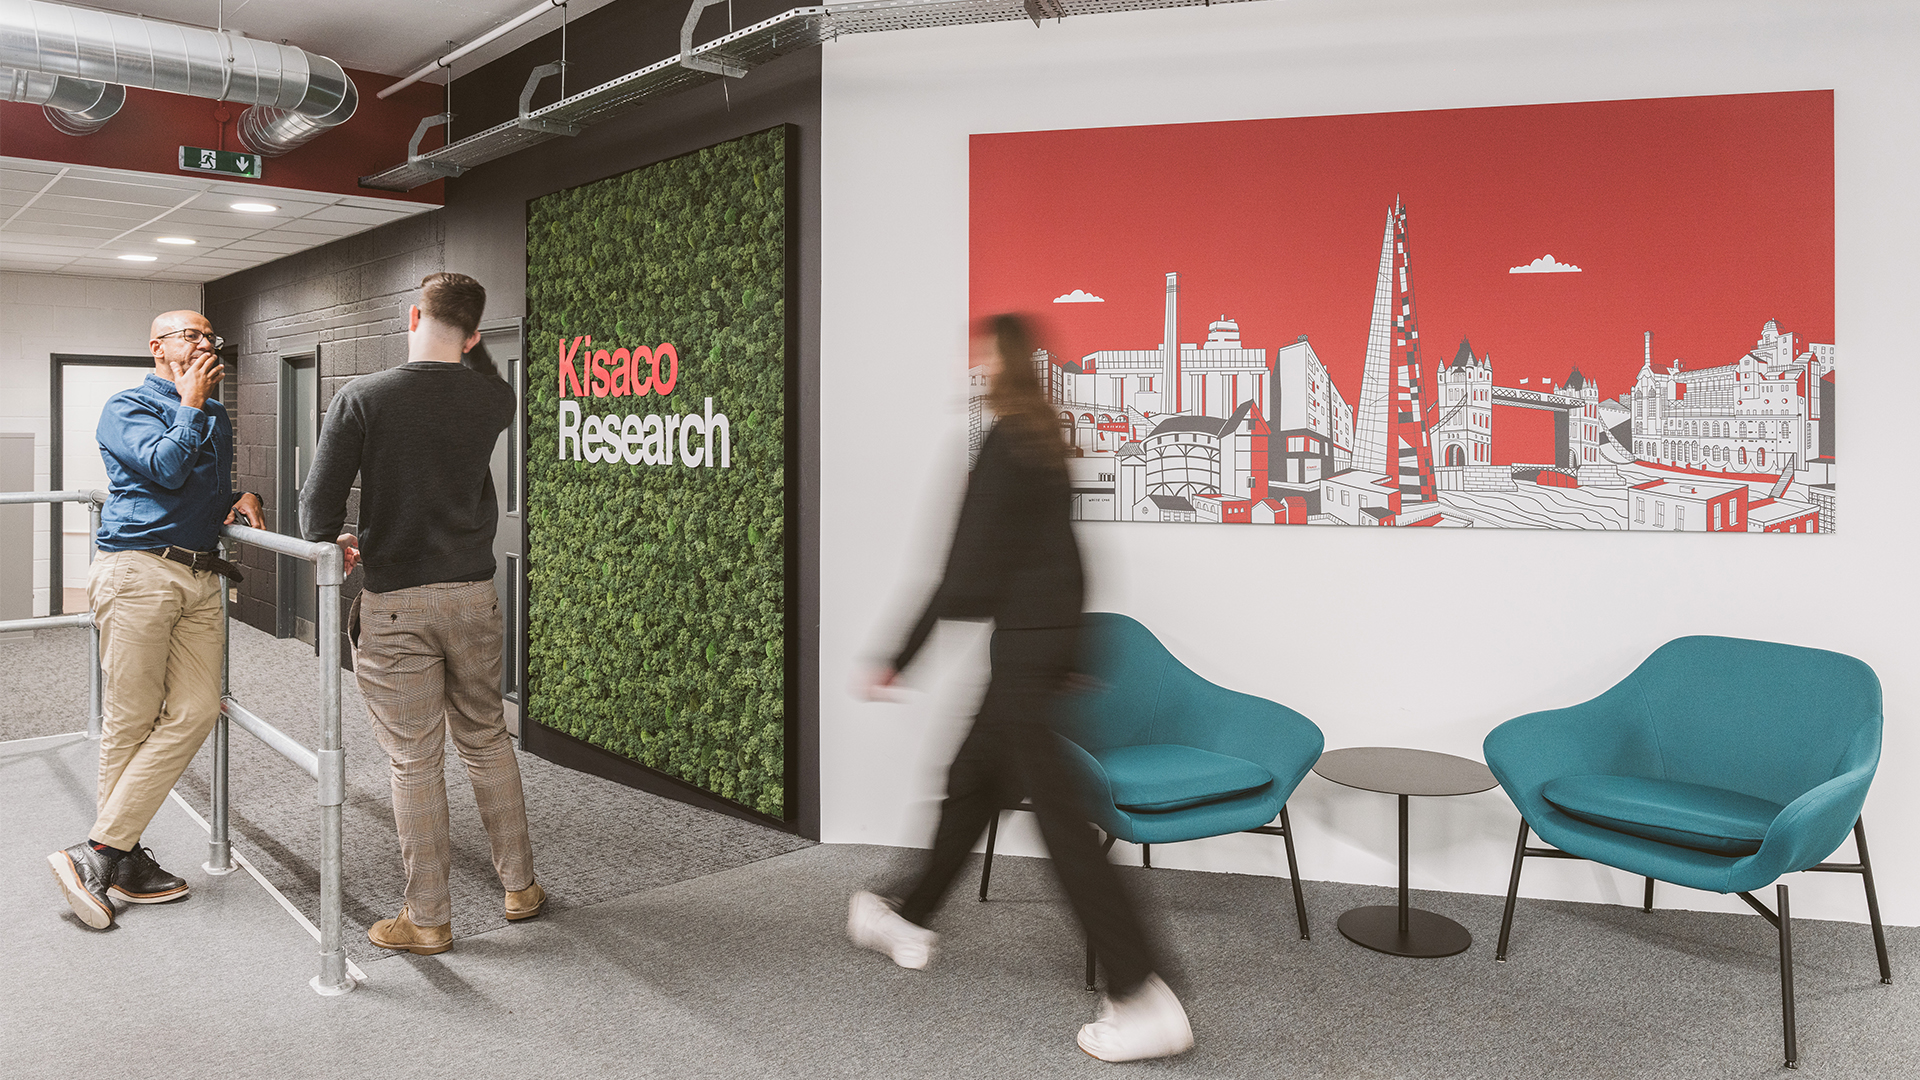 Kisaco Bermondsey Office Entrance with Branded Green Wall